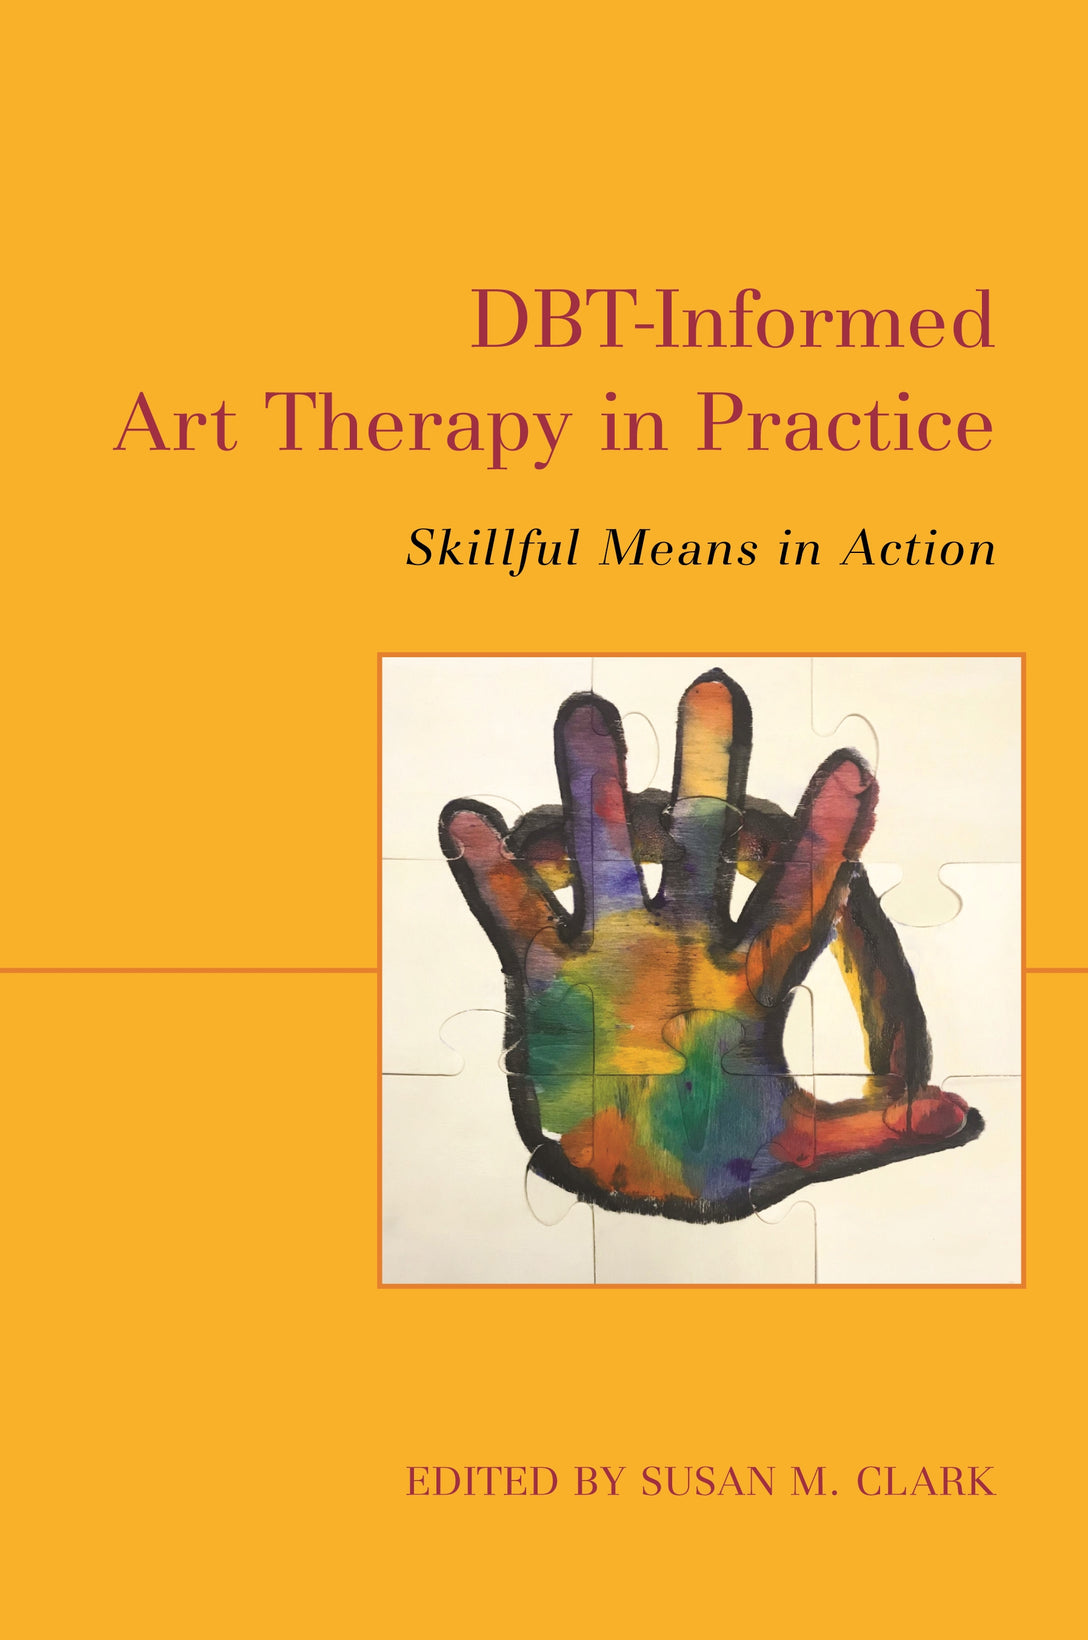 DBT-Informed Art Therapy in Practice by No Author Listed, Susan M. Clark